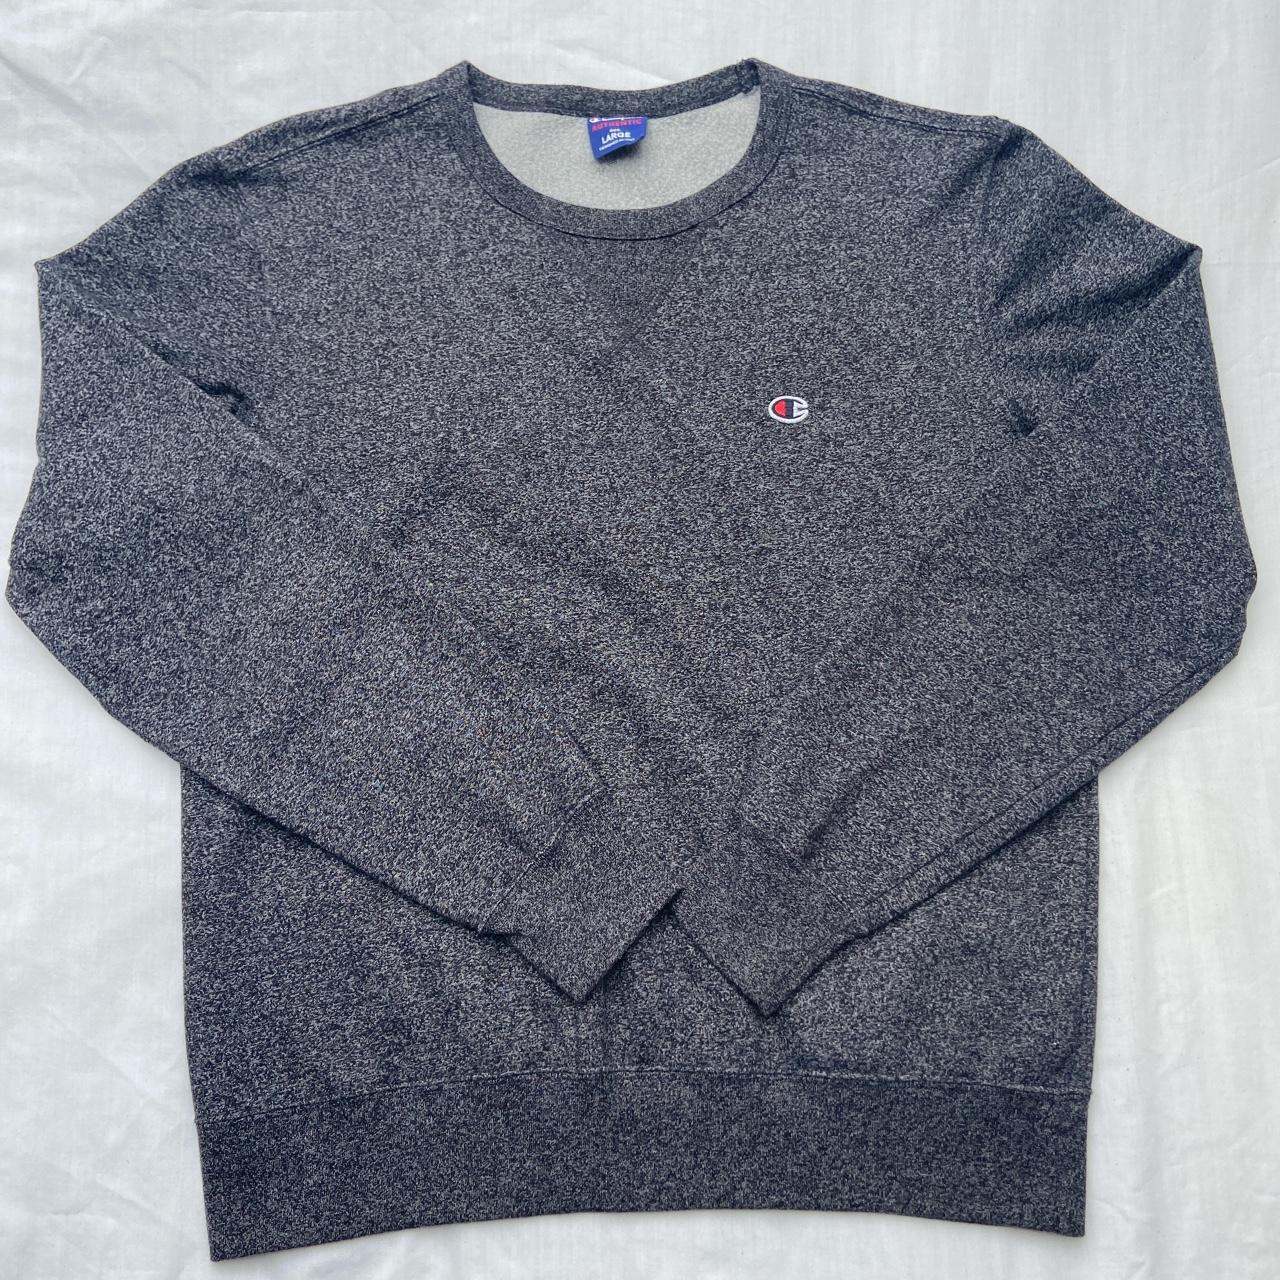 Charcoal / marbled authentic champion sweater Size... - Depop